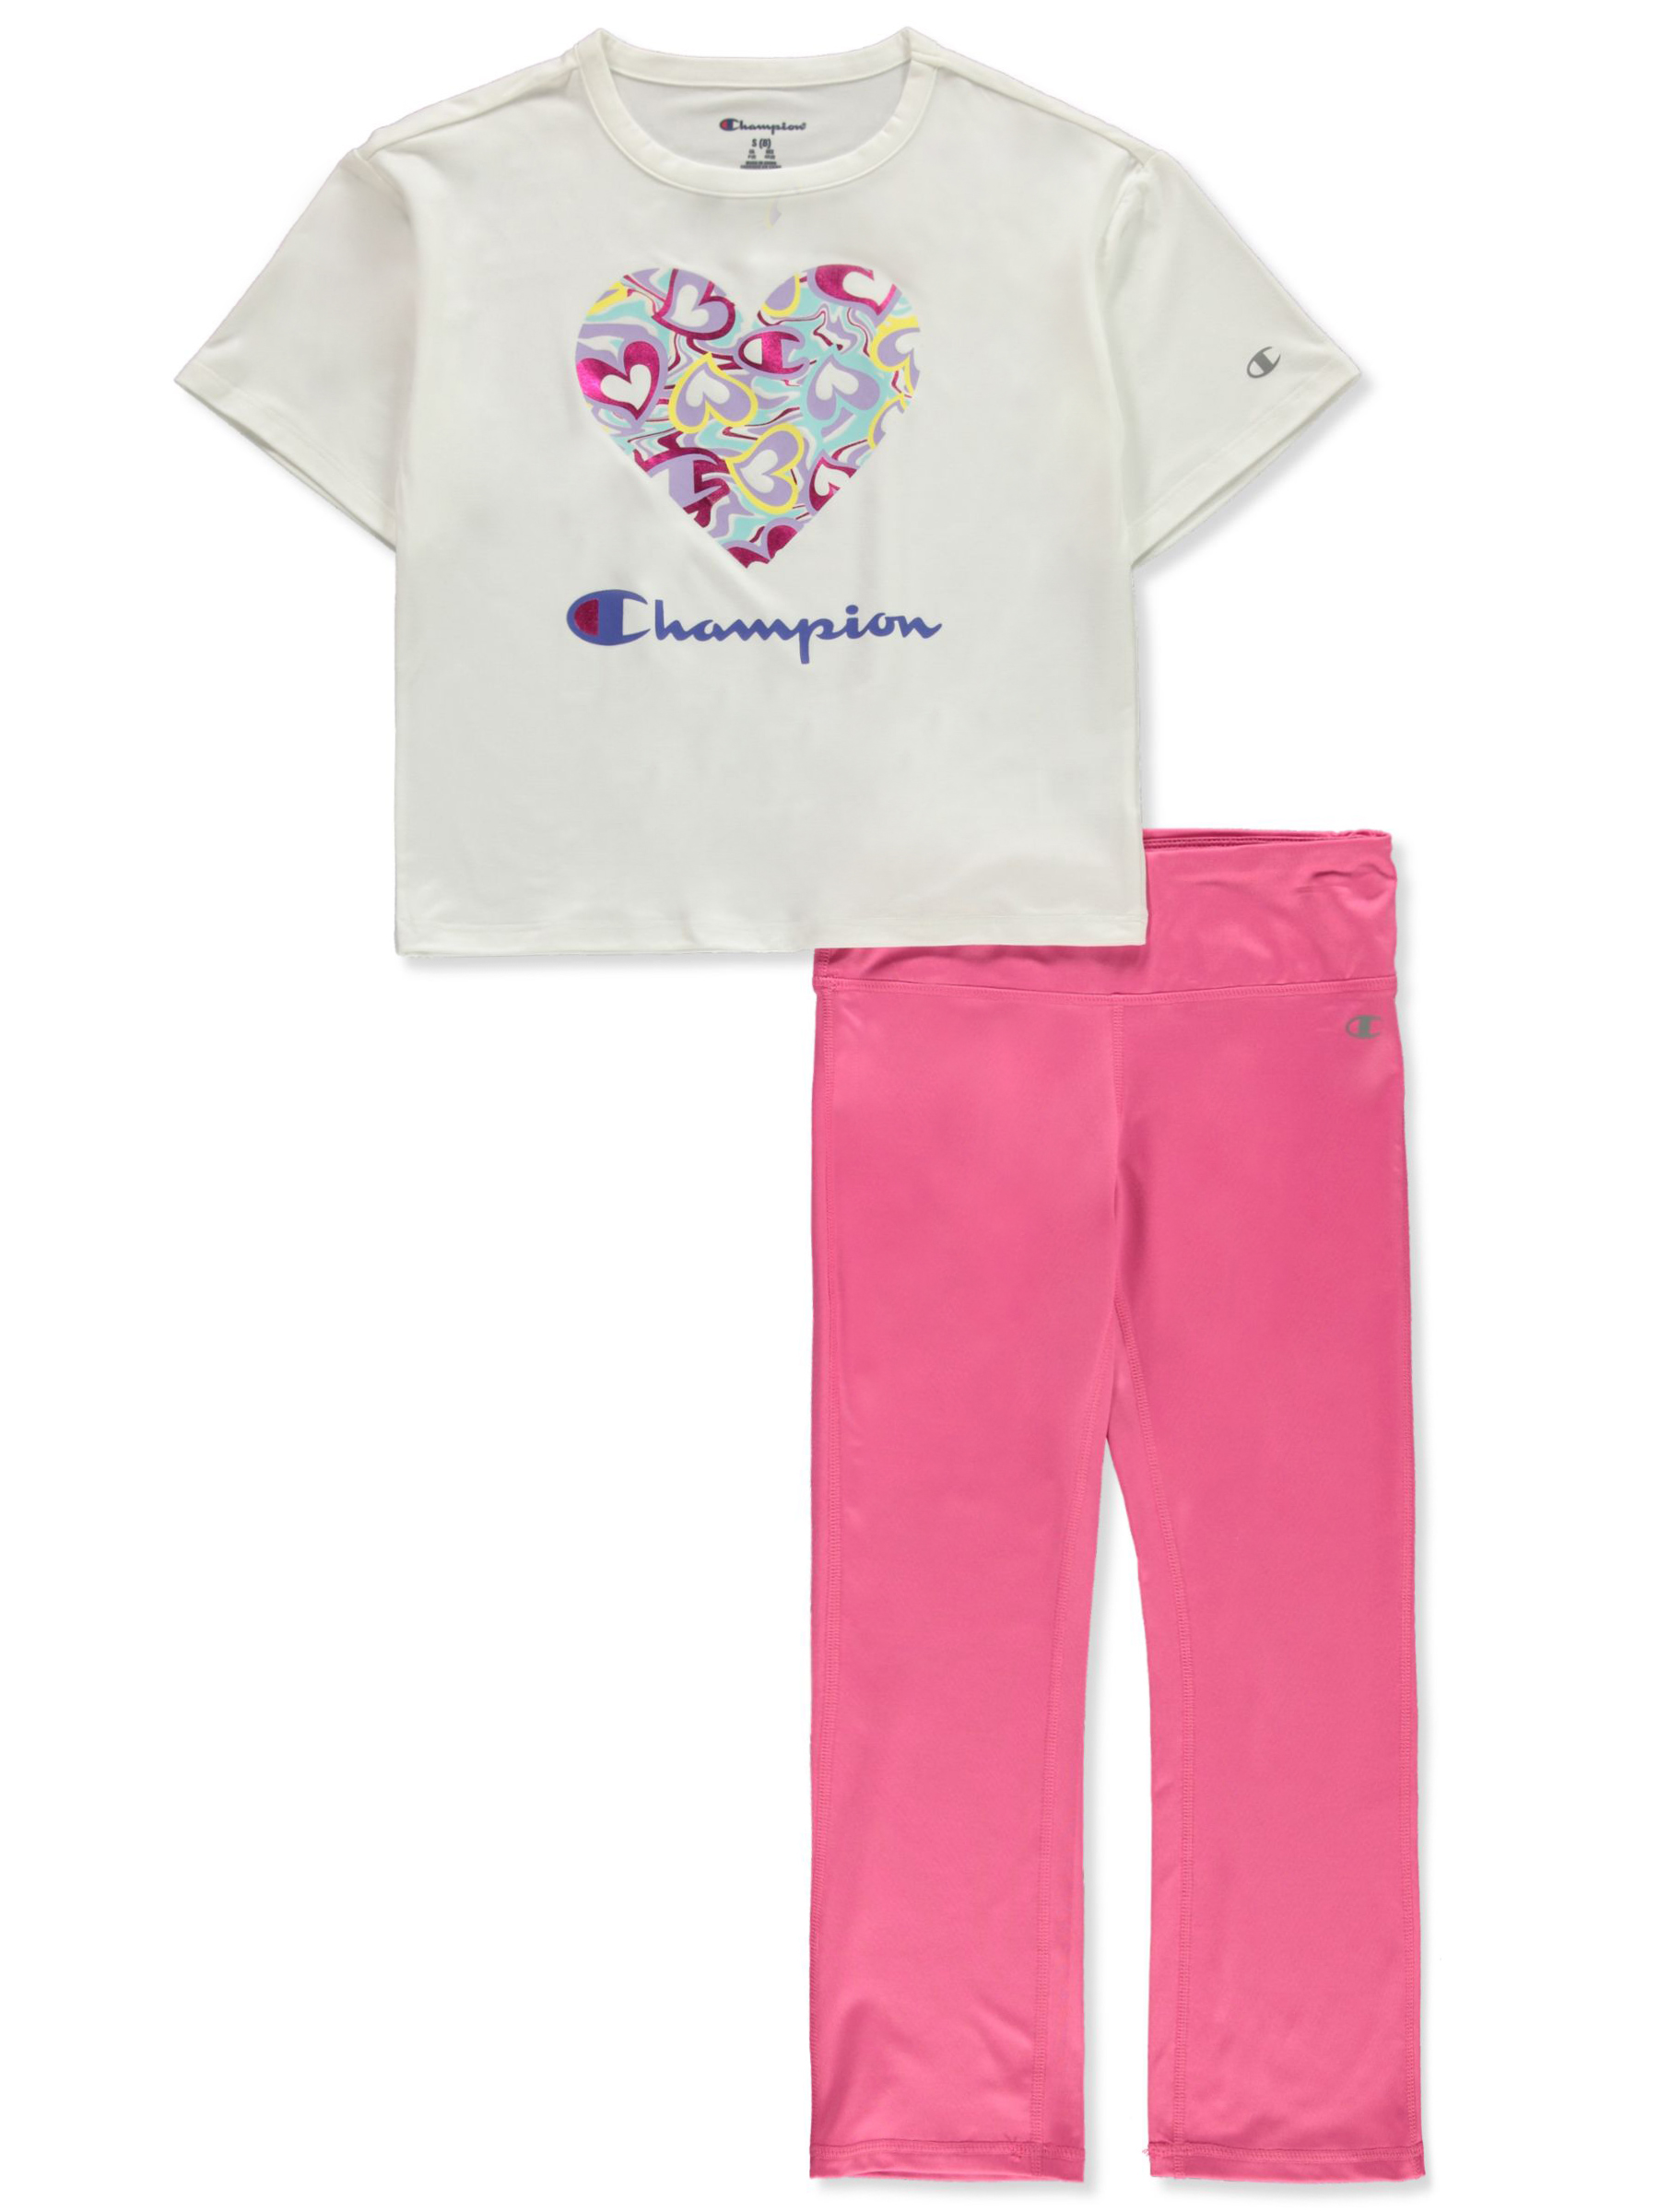 New! Girl's CHAMPION T-Shirt and Leggings Outfit Size 14/16